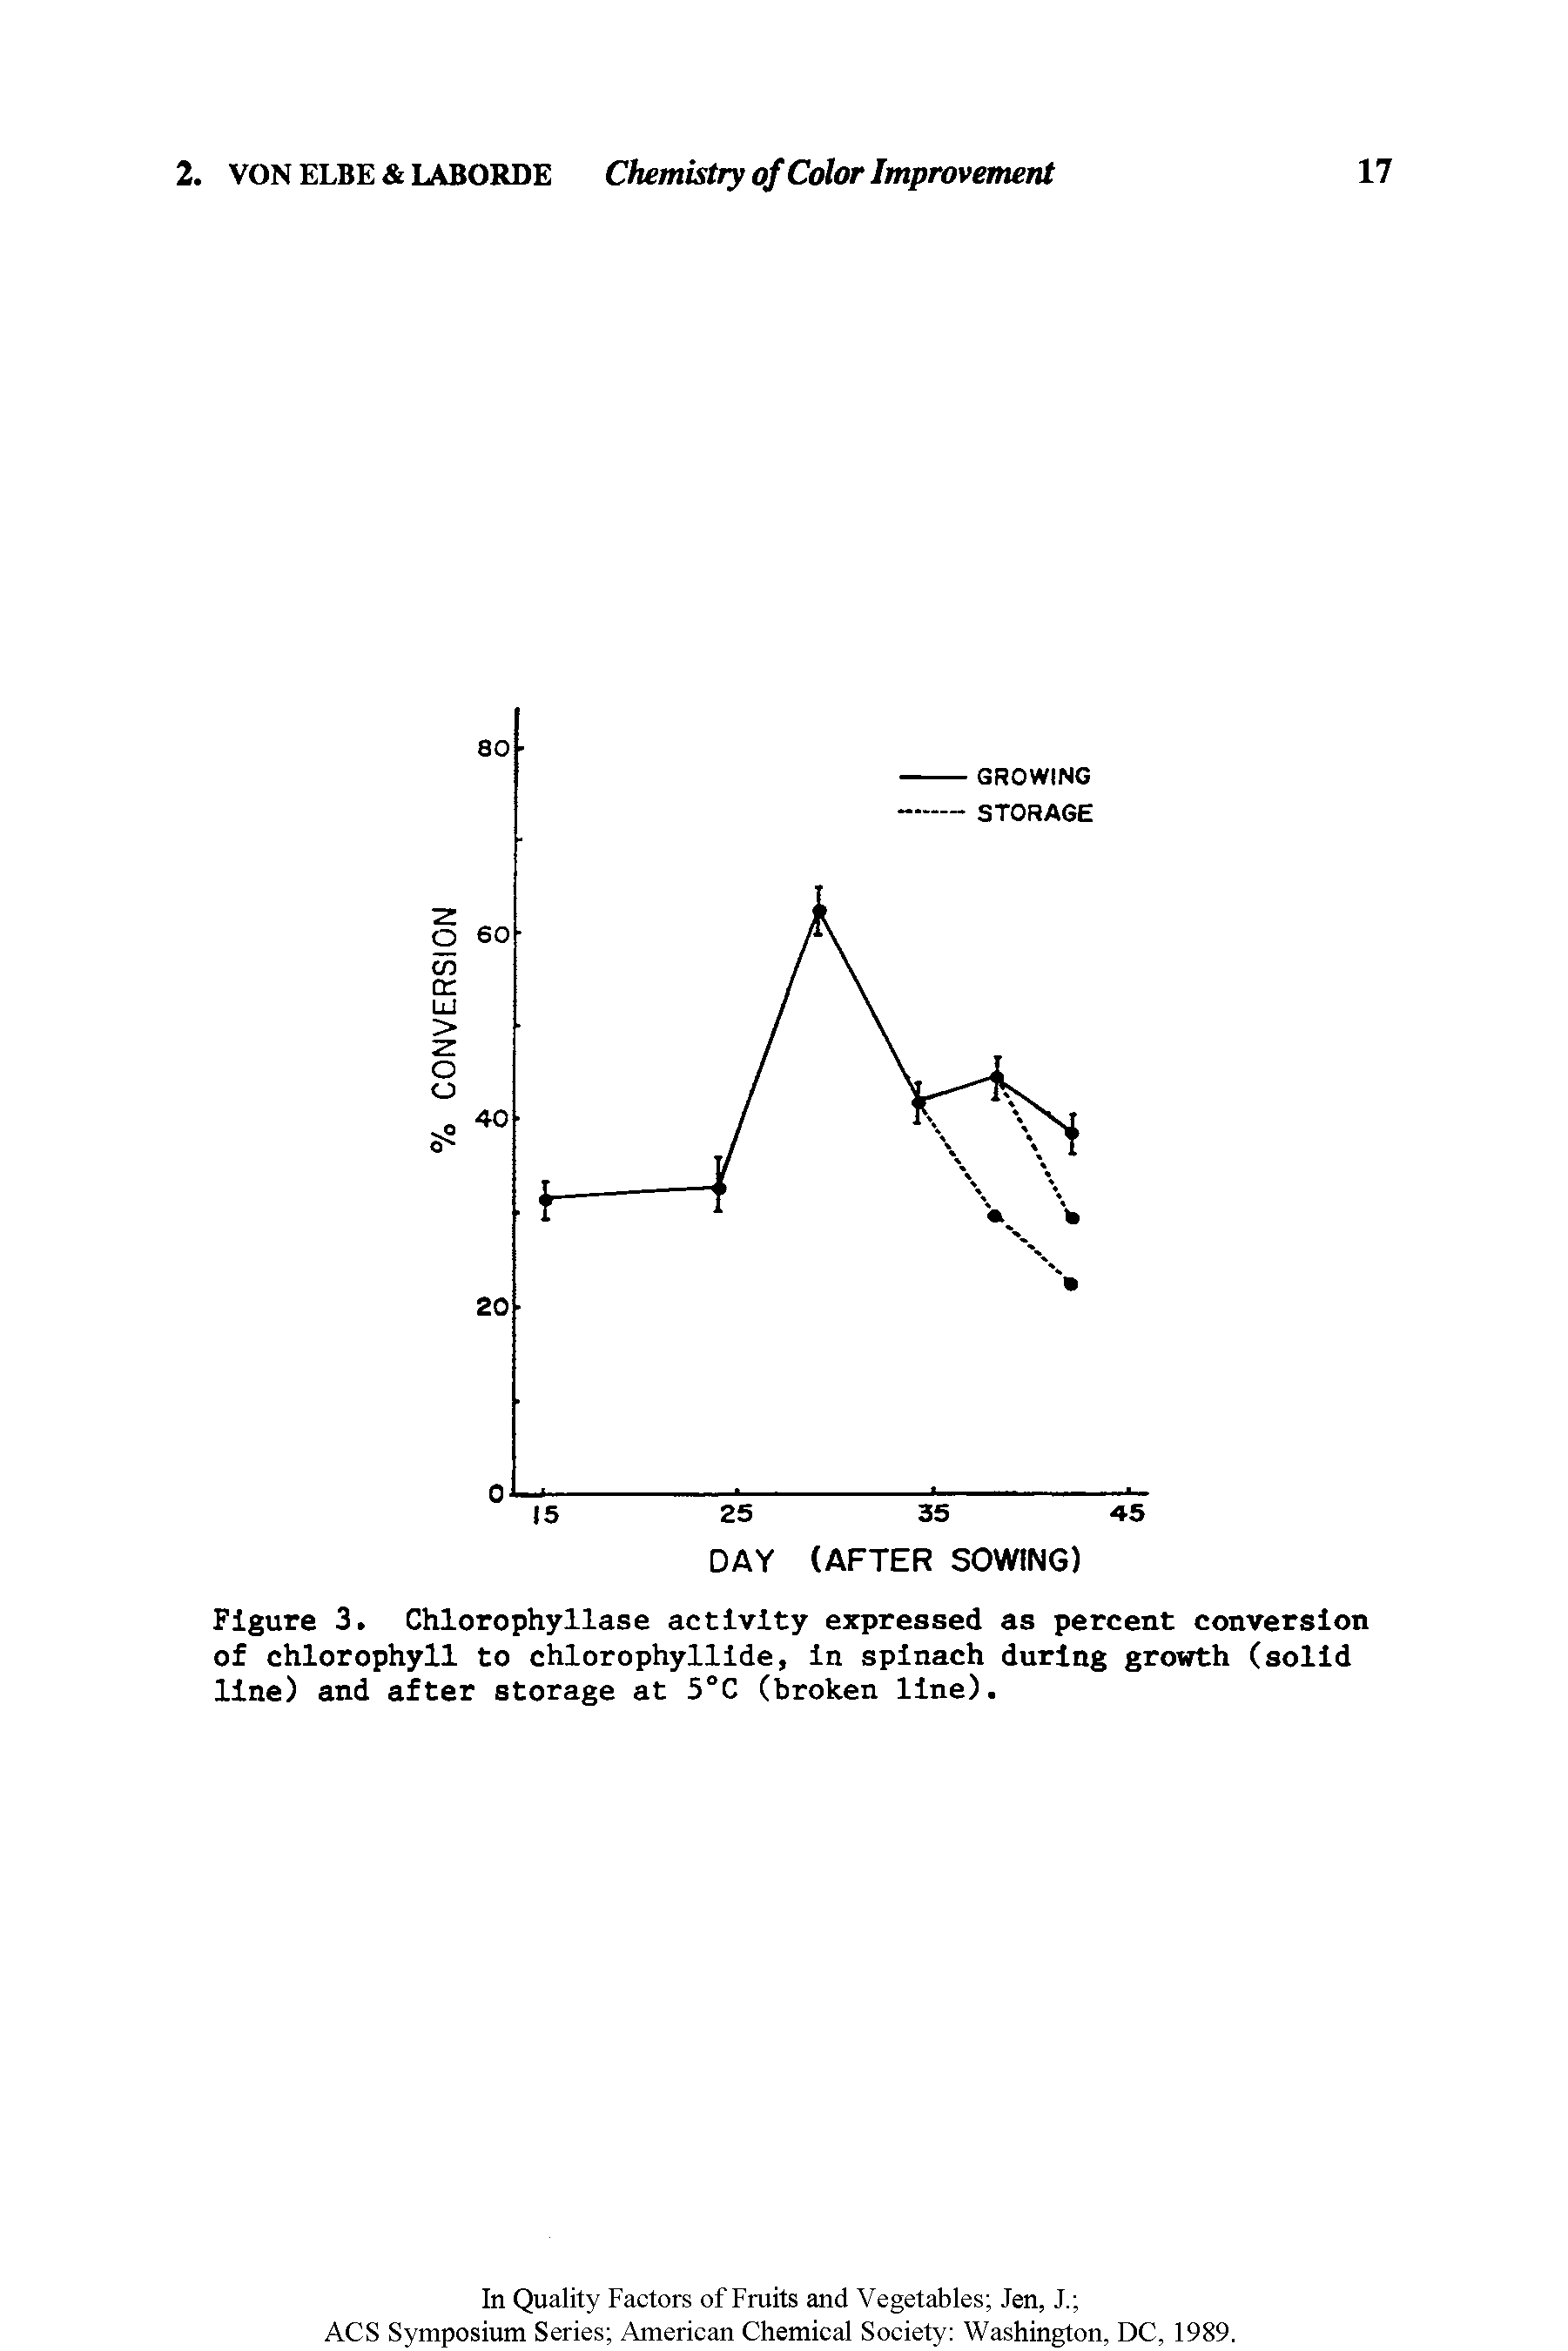 Figure 3. Chlorophyllase activity expressed as percent conversion of chlorophyll to chlorophyllide, In spinach during growth (solid line) and after storage at 5°C (broken line).